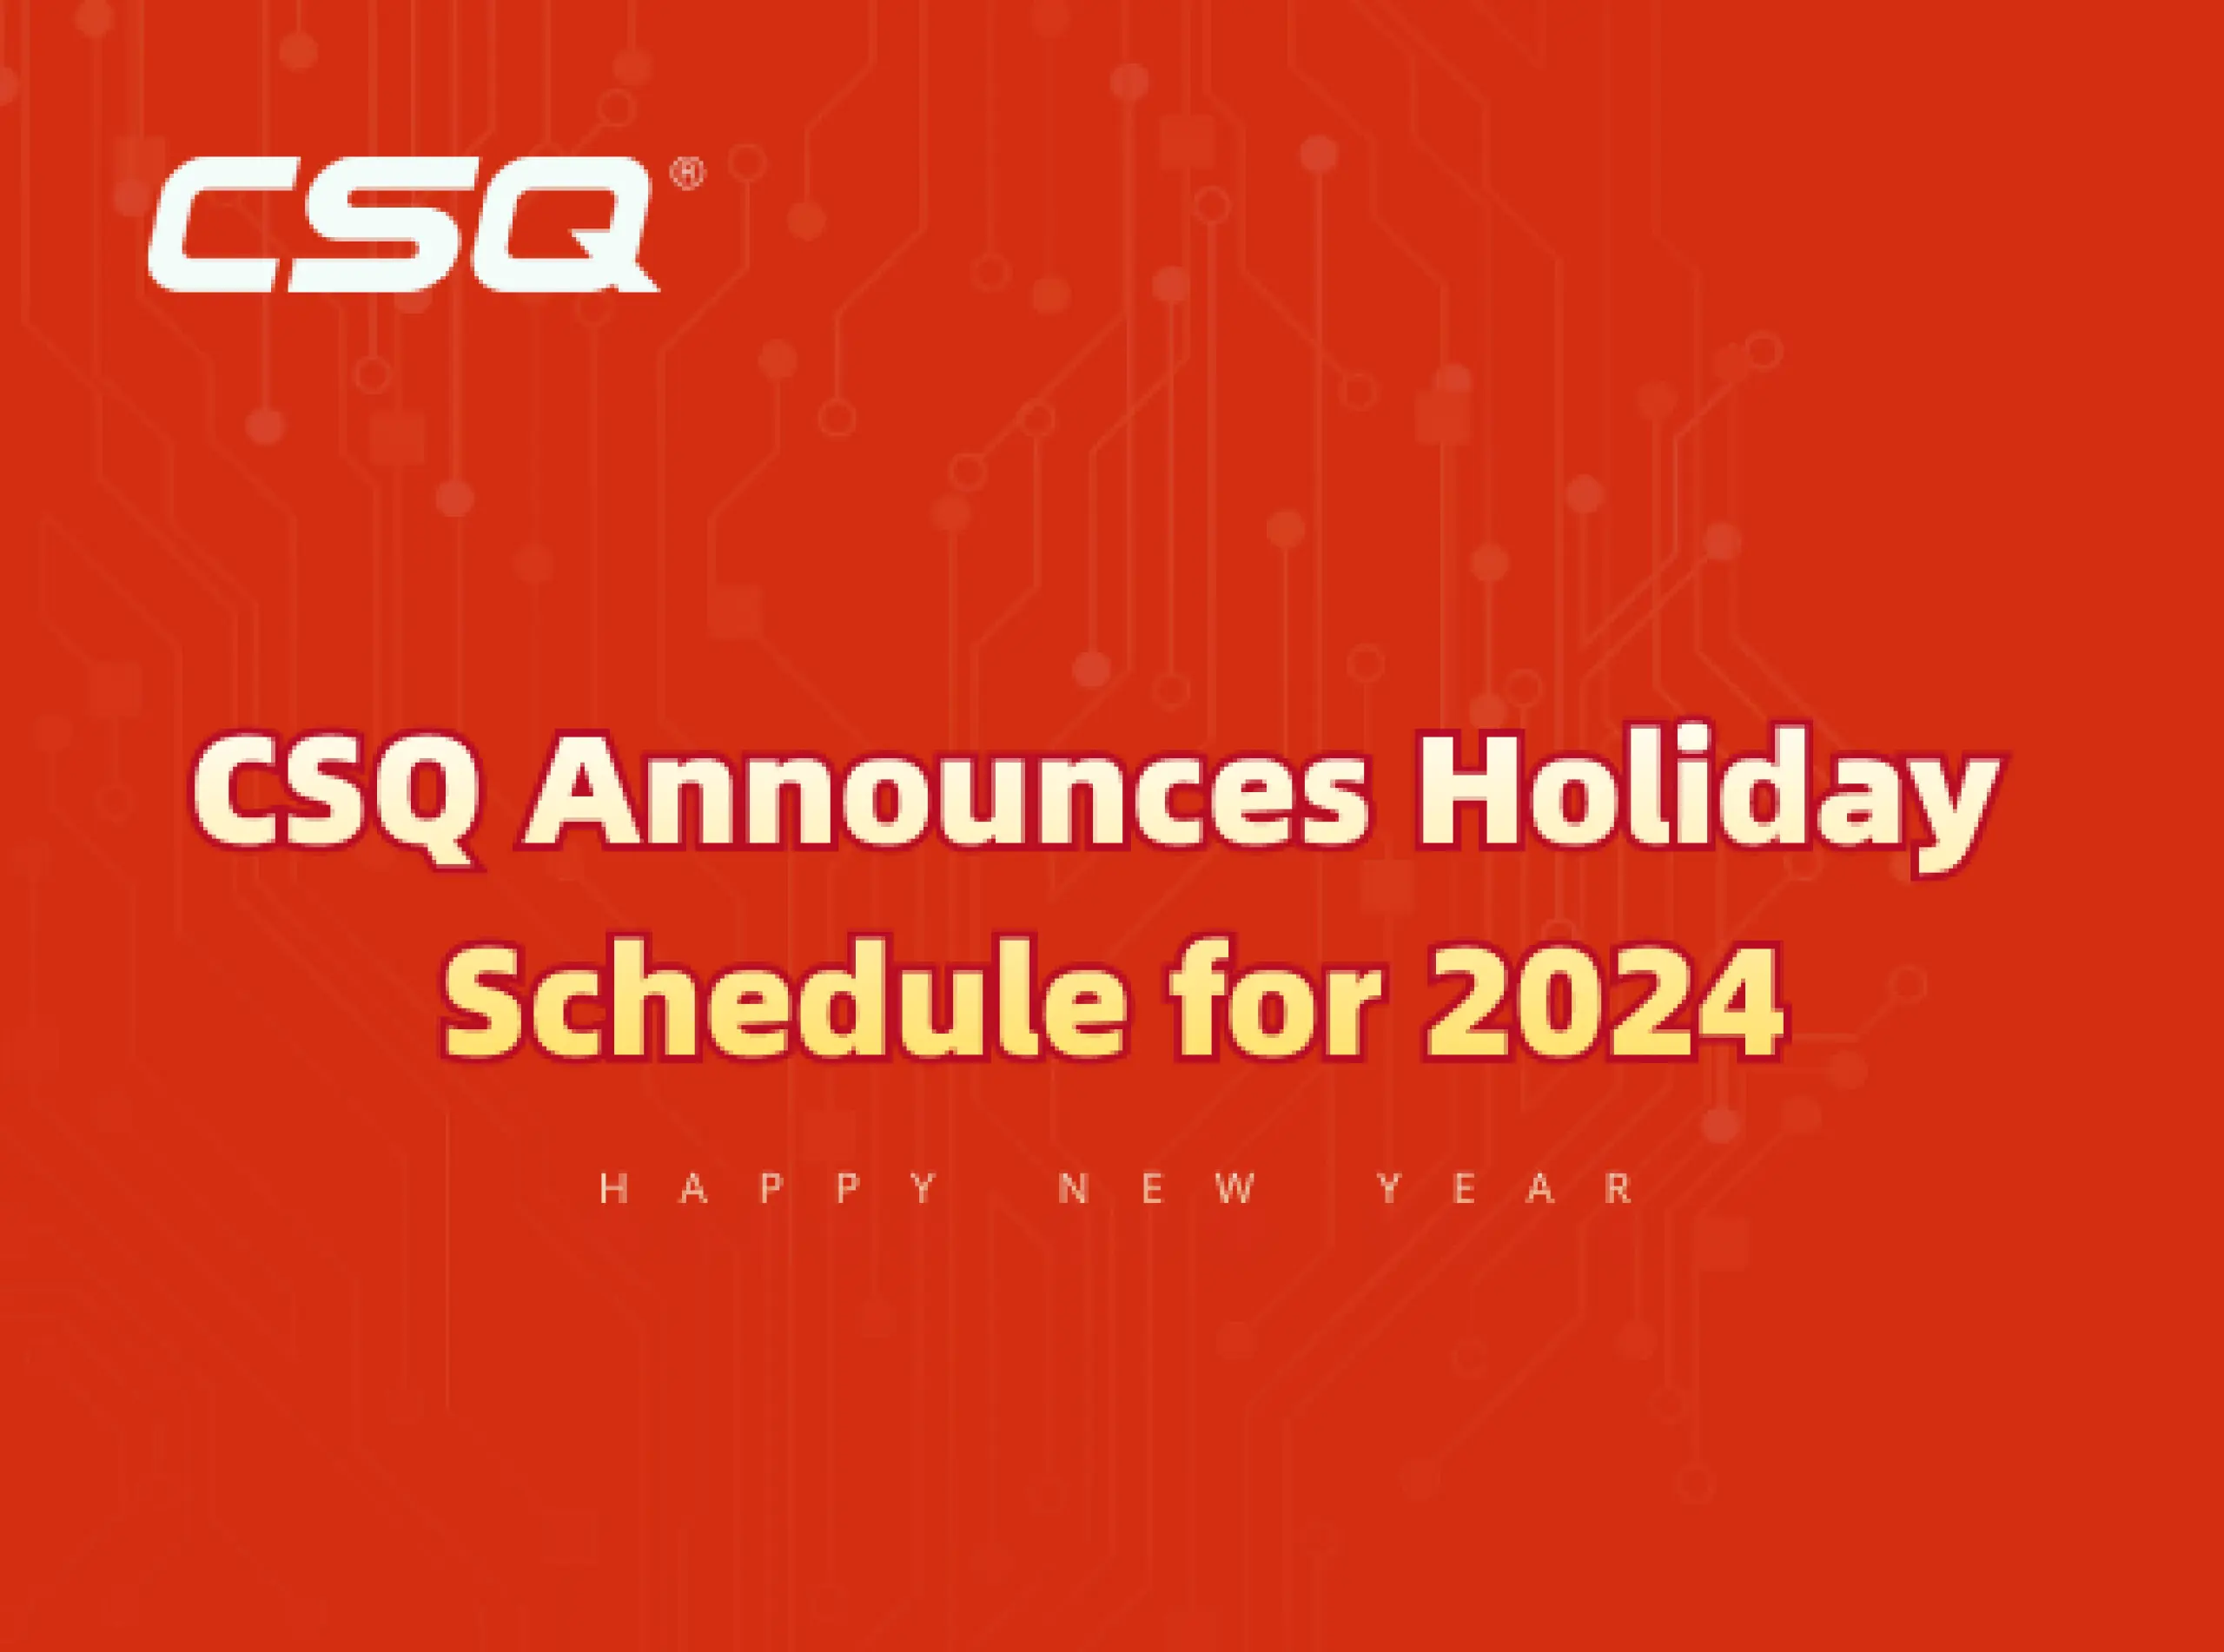 CSQ Announces Holiday Schedule for 2024